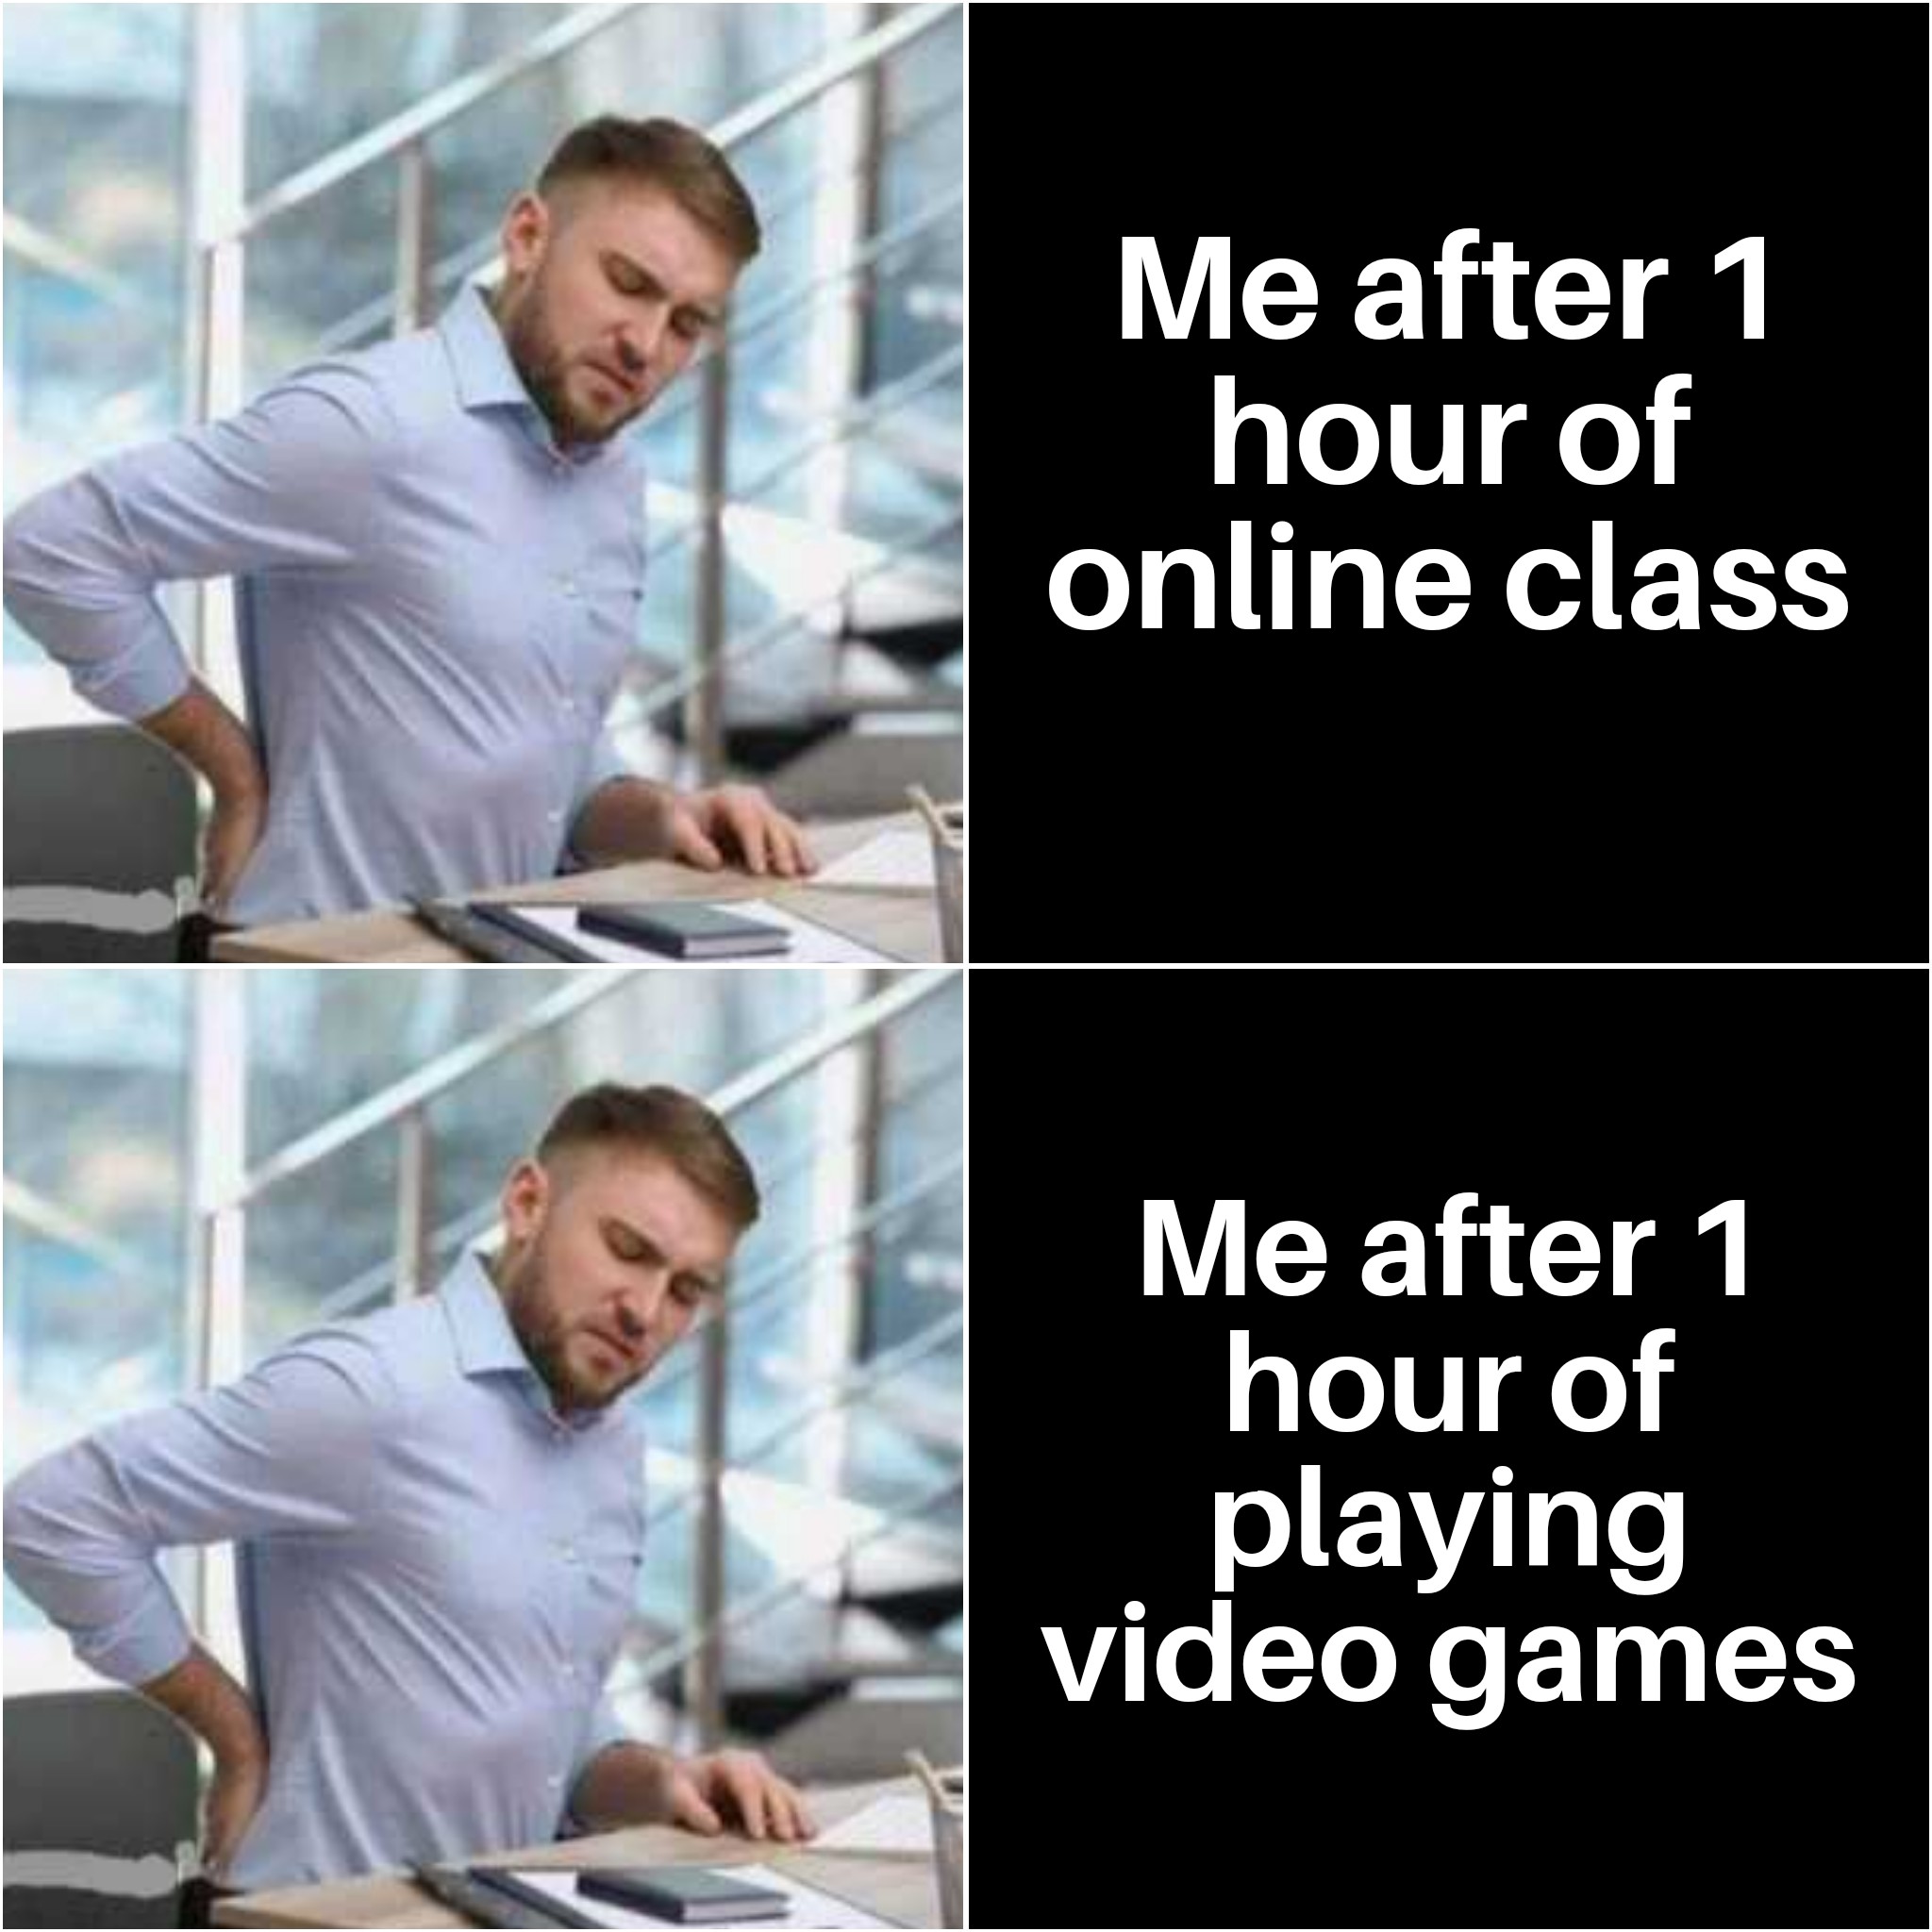 meme 8 hours playing video games - Me after 1 hour of online class Me after 1 hour of playing video games